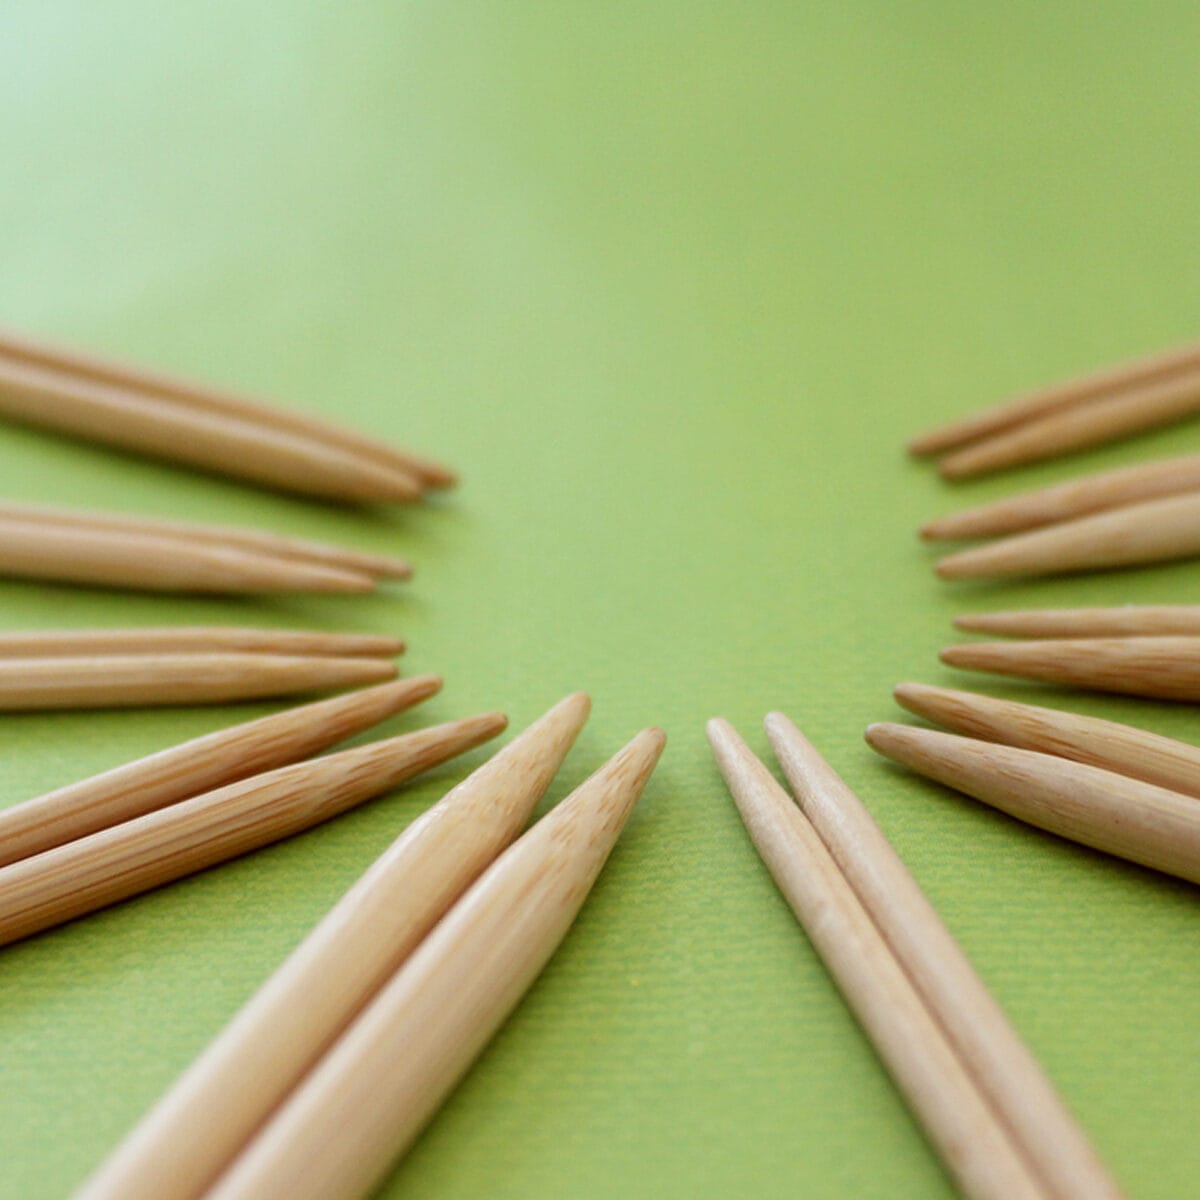 Ten pairs of wooden bamboo knitting needles arranged in a circular pattern atop a green background.